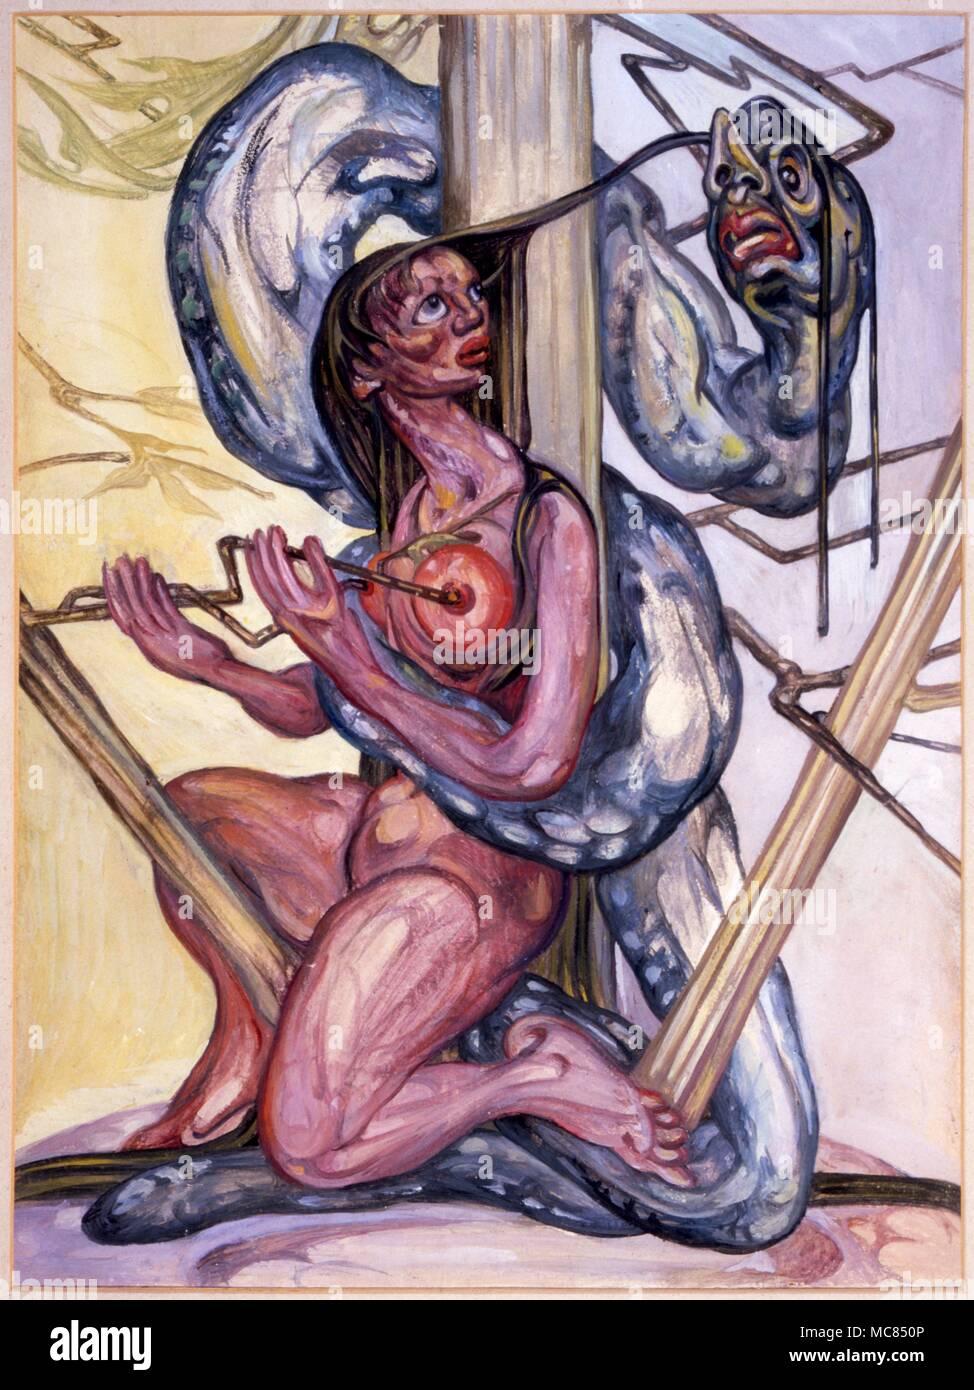 Eve with the tempting serpent - painting by Fay Pomerance, 'Persuasion in Eden', 1950. Stock Photo